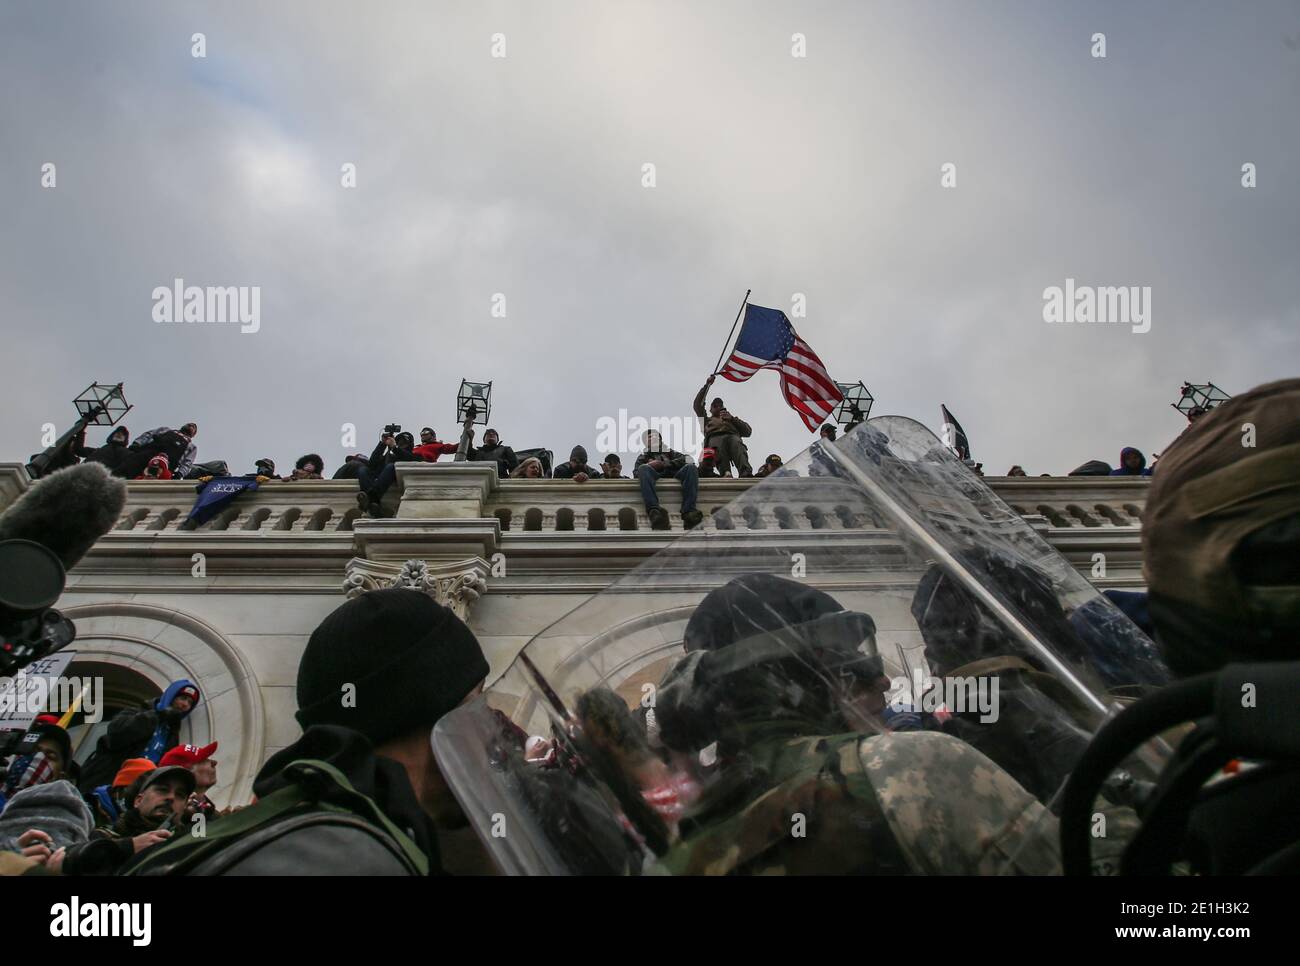 Photos from the January sixth protest at the Capitol building that resulted in 4 deaths. Protestors stormed the innaugural scaffolding and broke into the building despite resistance from officers inside including tear gas. Stock Photo